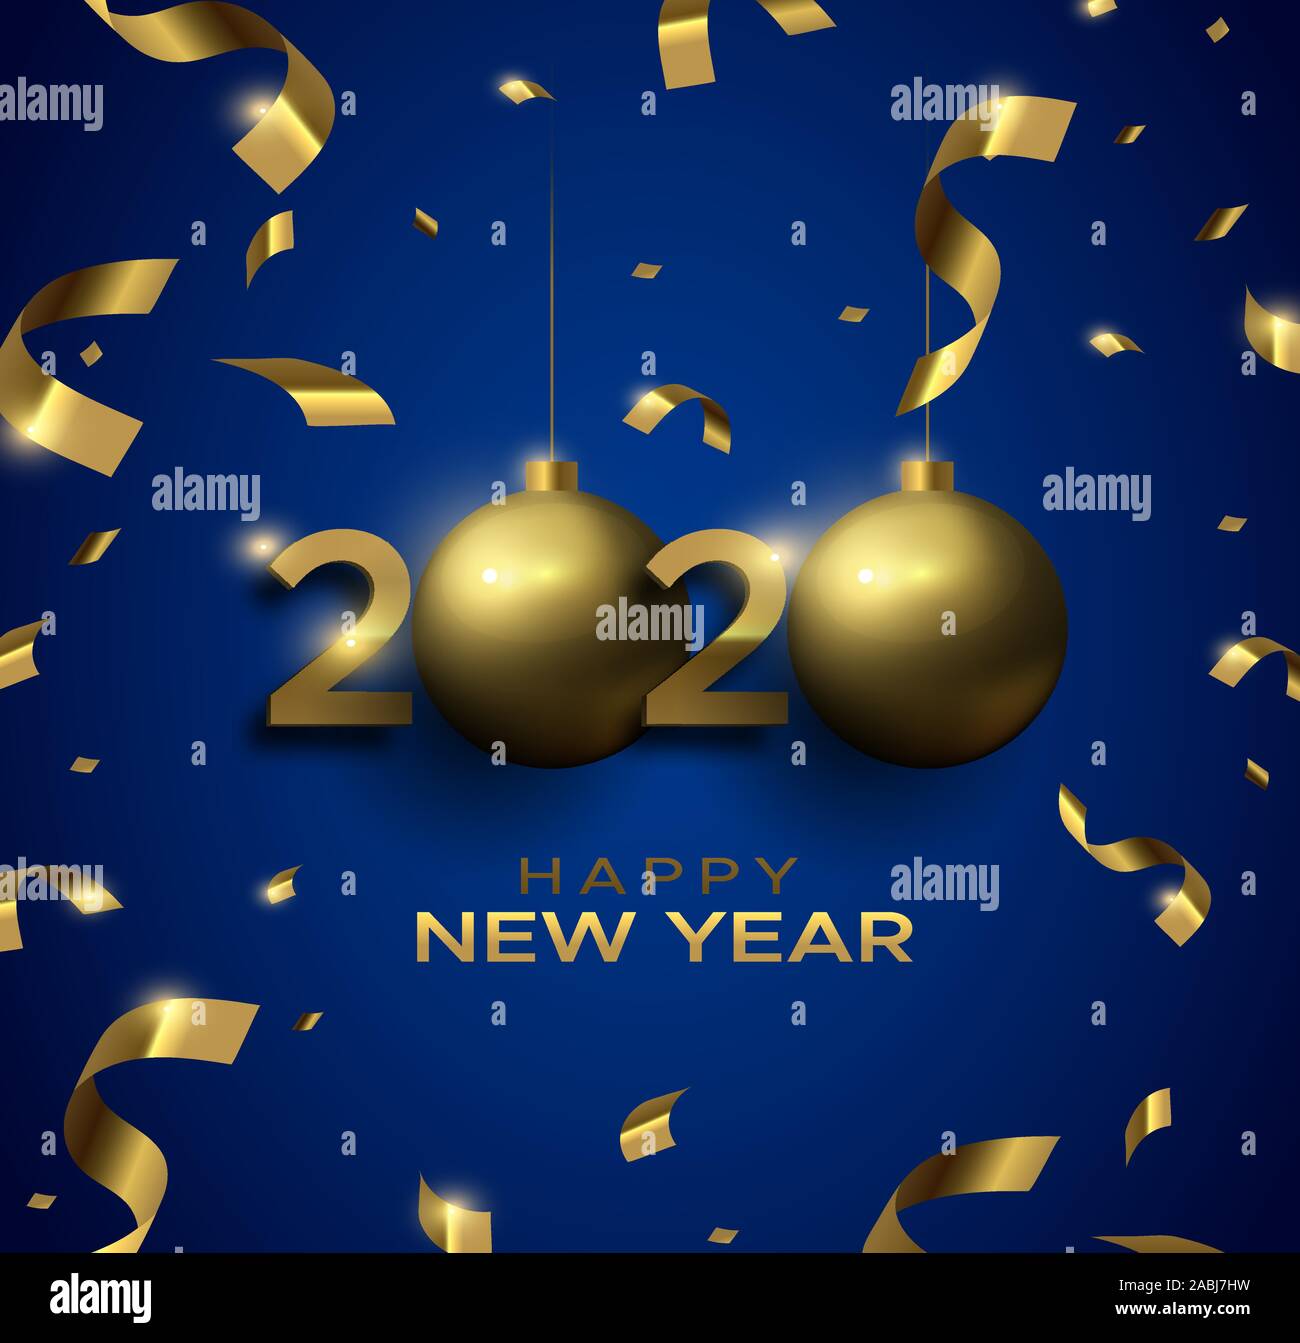 Happy New Year 2020 greeting card illustration of gold 3d holiday ornament baubles and golden party confetti on blue background. Stock Vector